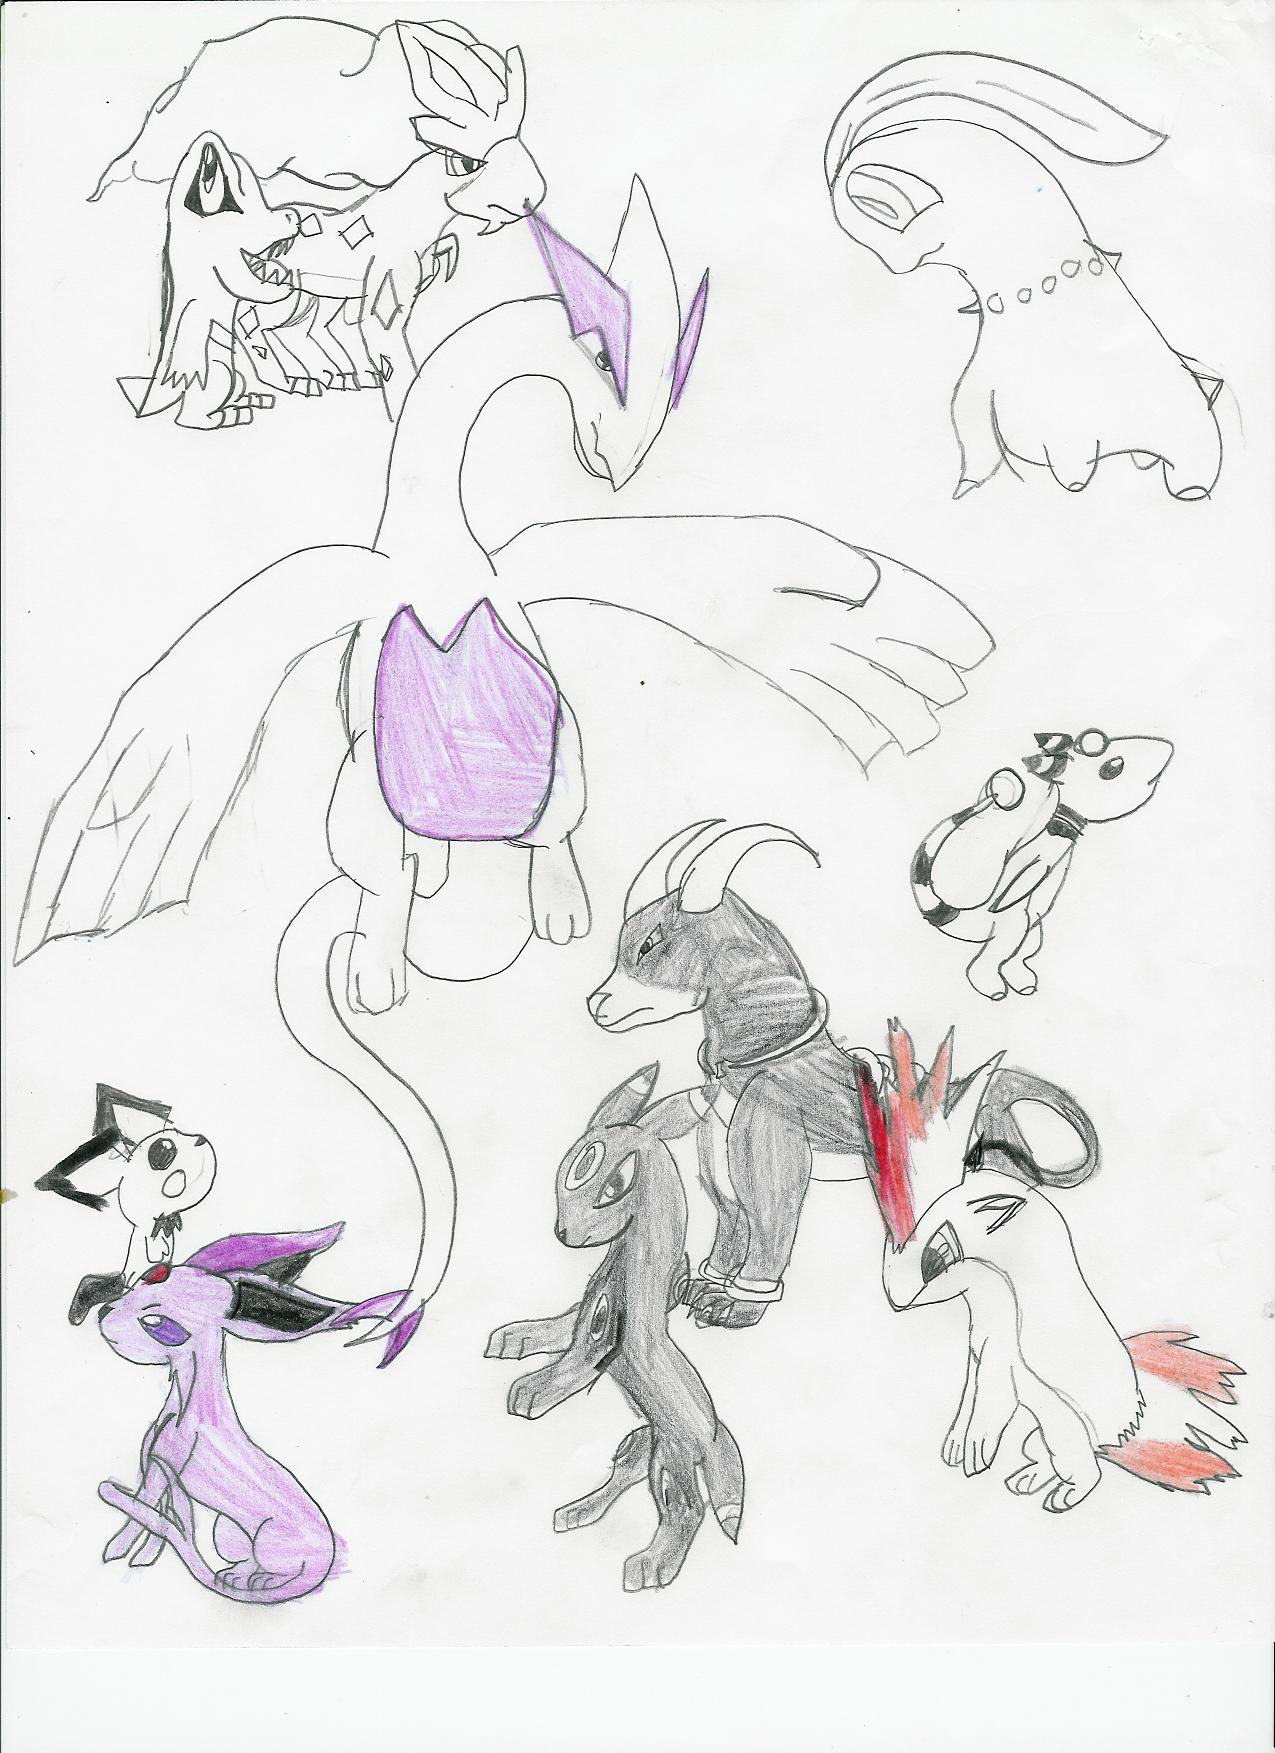 Johto Pokemon by winged_wolf_of_the_sky